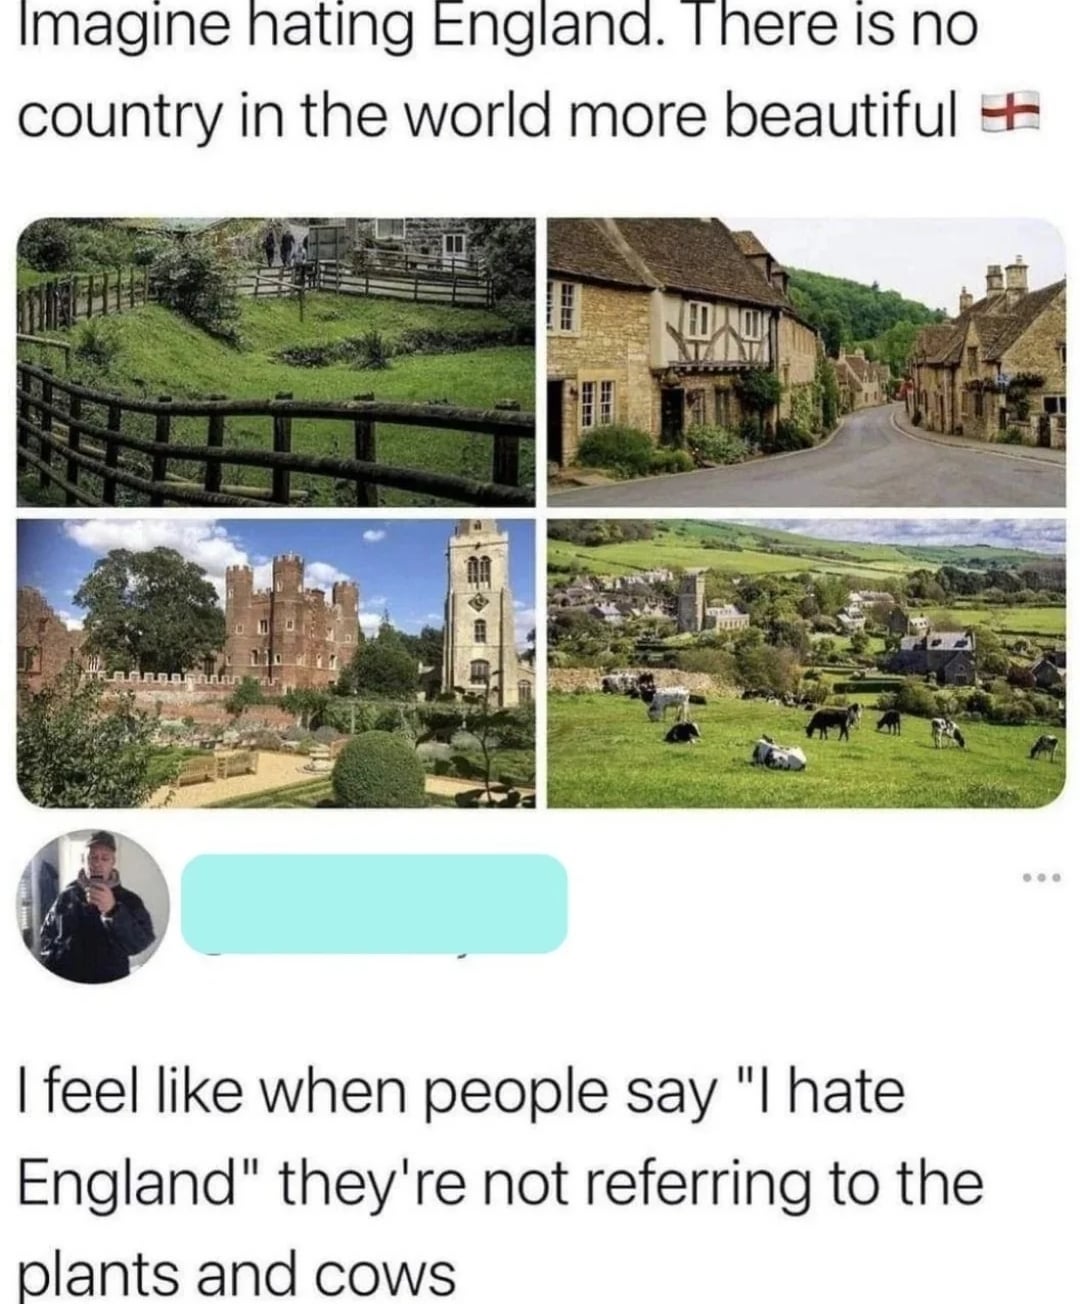 funniest tweets of the week - water resources - Imagine hating England. There is no country in the world more beautiful 7.000 I feel when people say "I hate England" they're not referring to the plants and cows ...